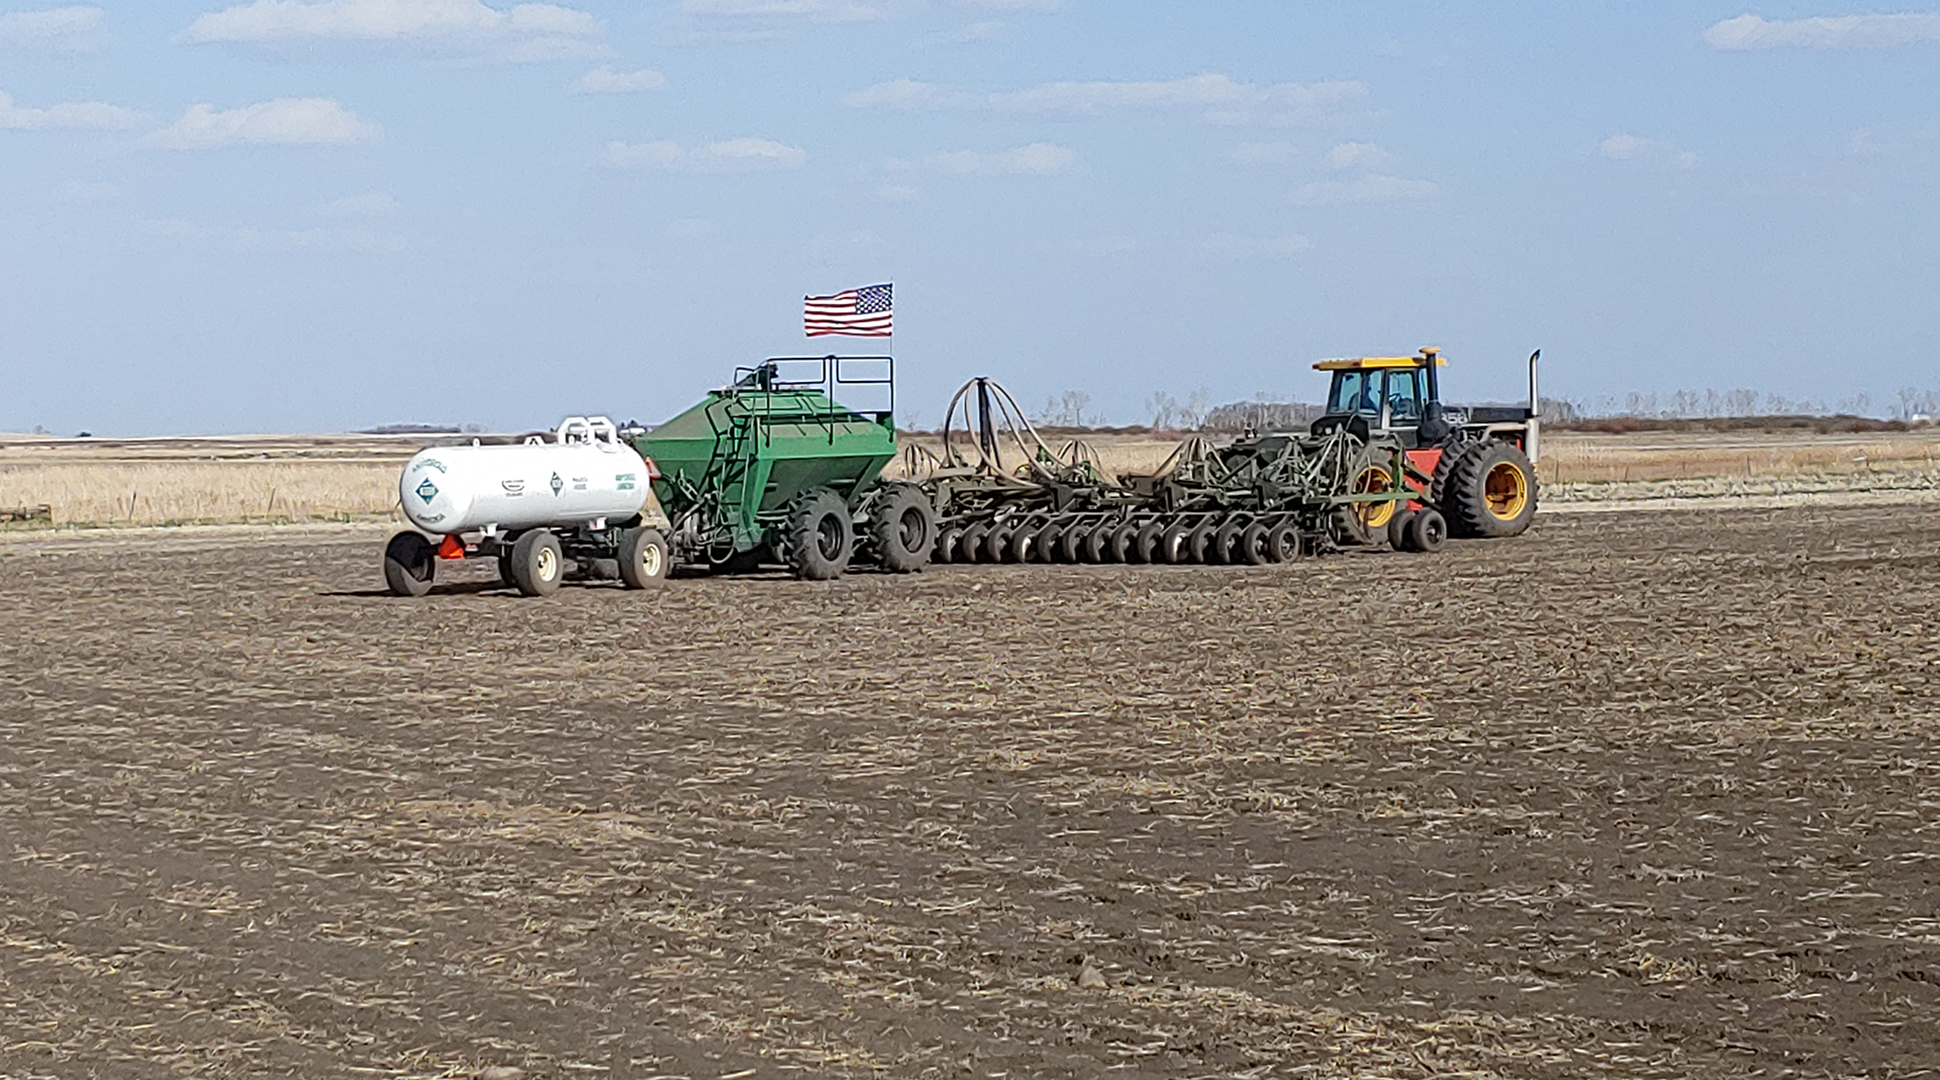 What are those big tanks farmers haul behind their tractors?